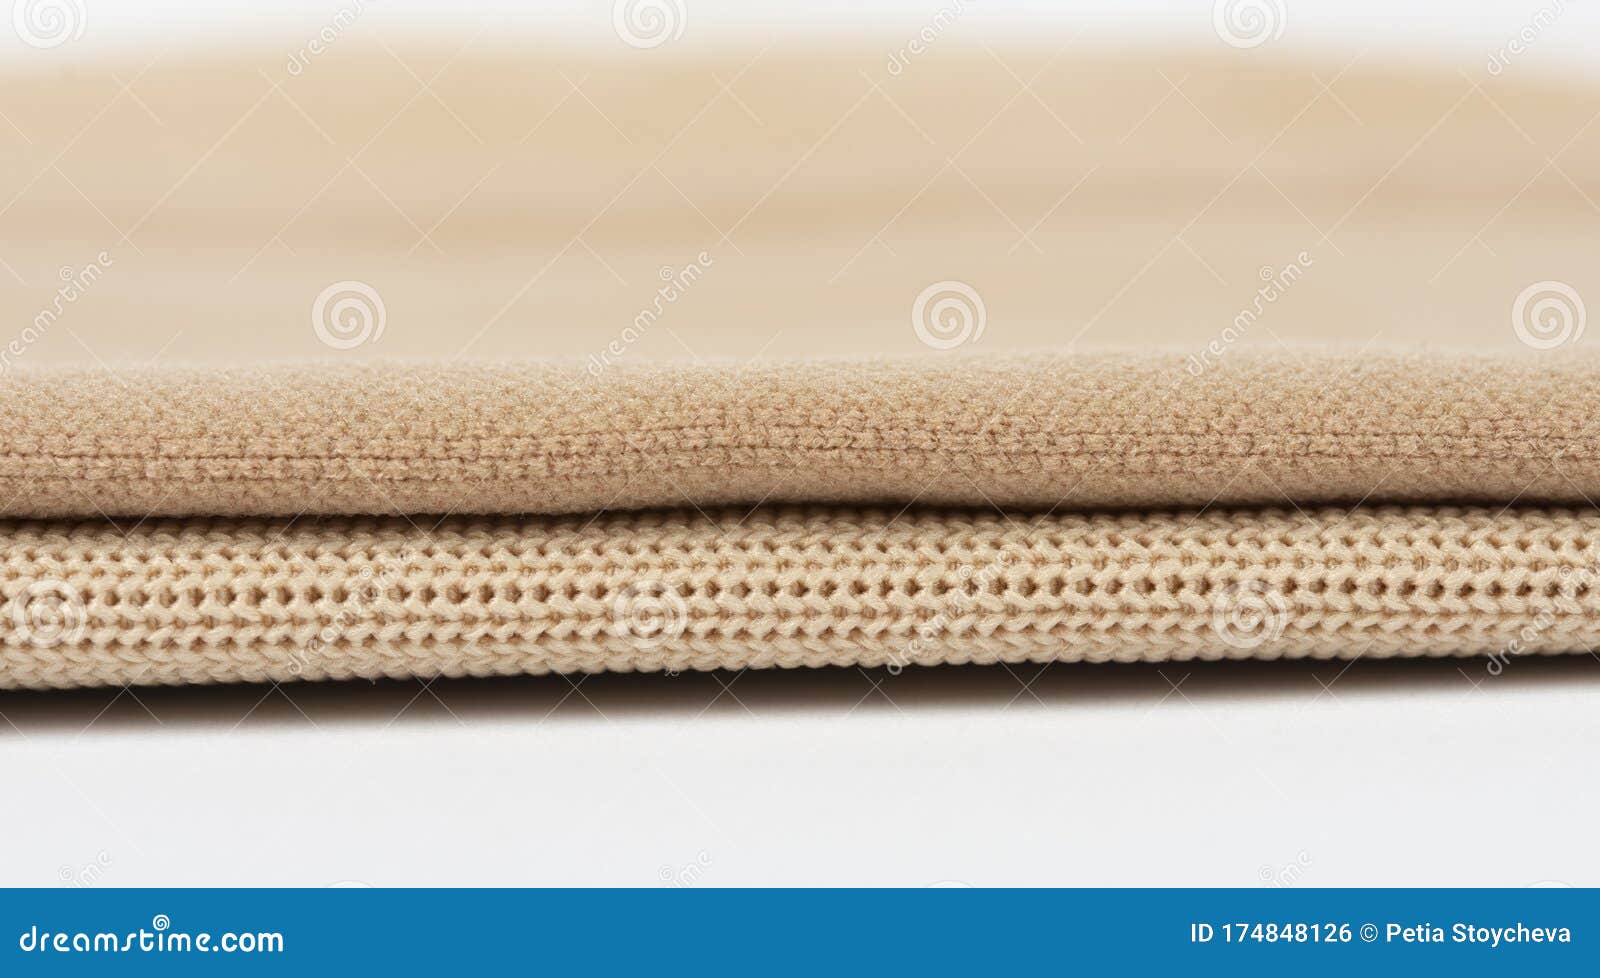 Close Up of Compression Garments for Lymphedema, Edema and Lipedema - the  Difference between Flat Knit and Circular Knit Stock Photo - Image of  clinical, garments: 174848126